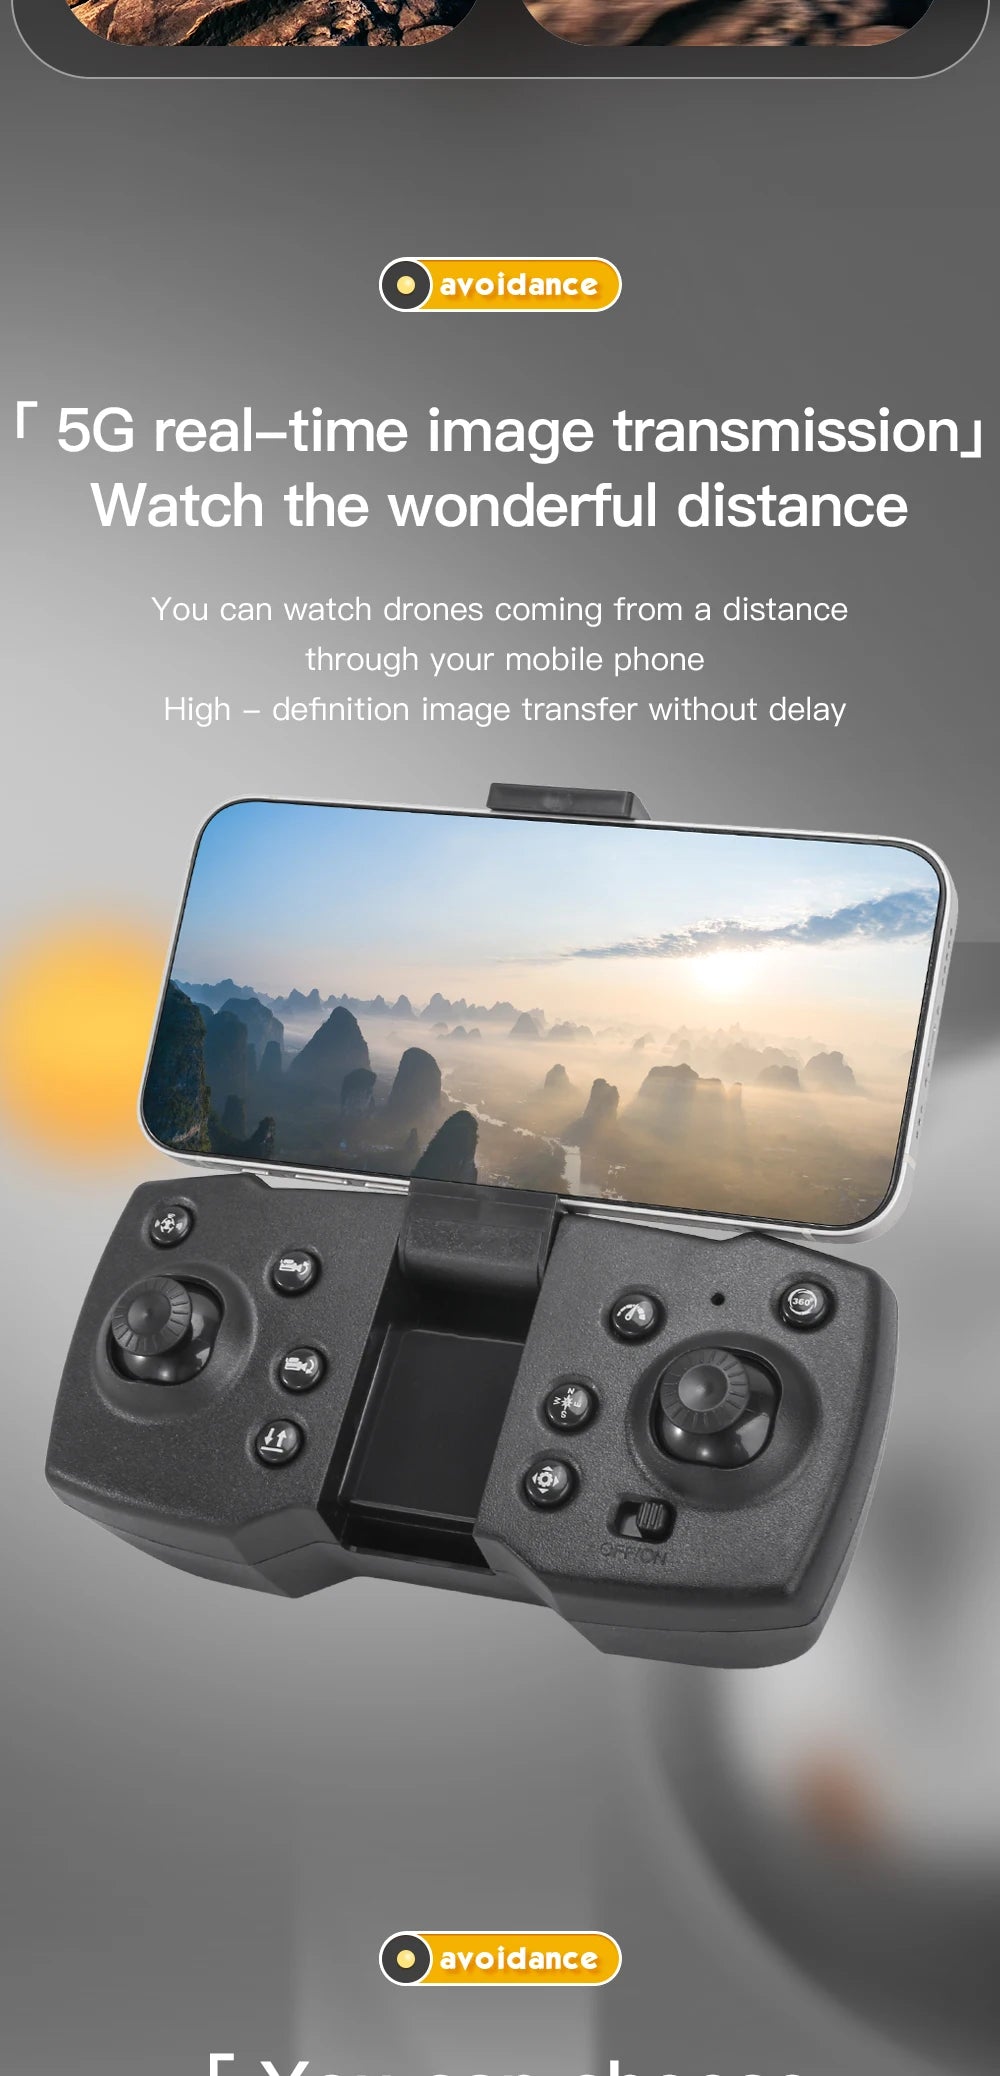 AE11 Drone, avoidance r 5g real-time image transmission] watch drone